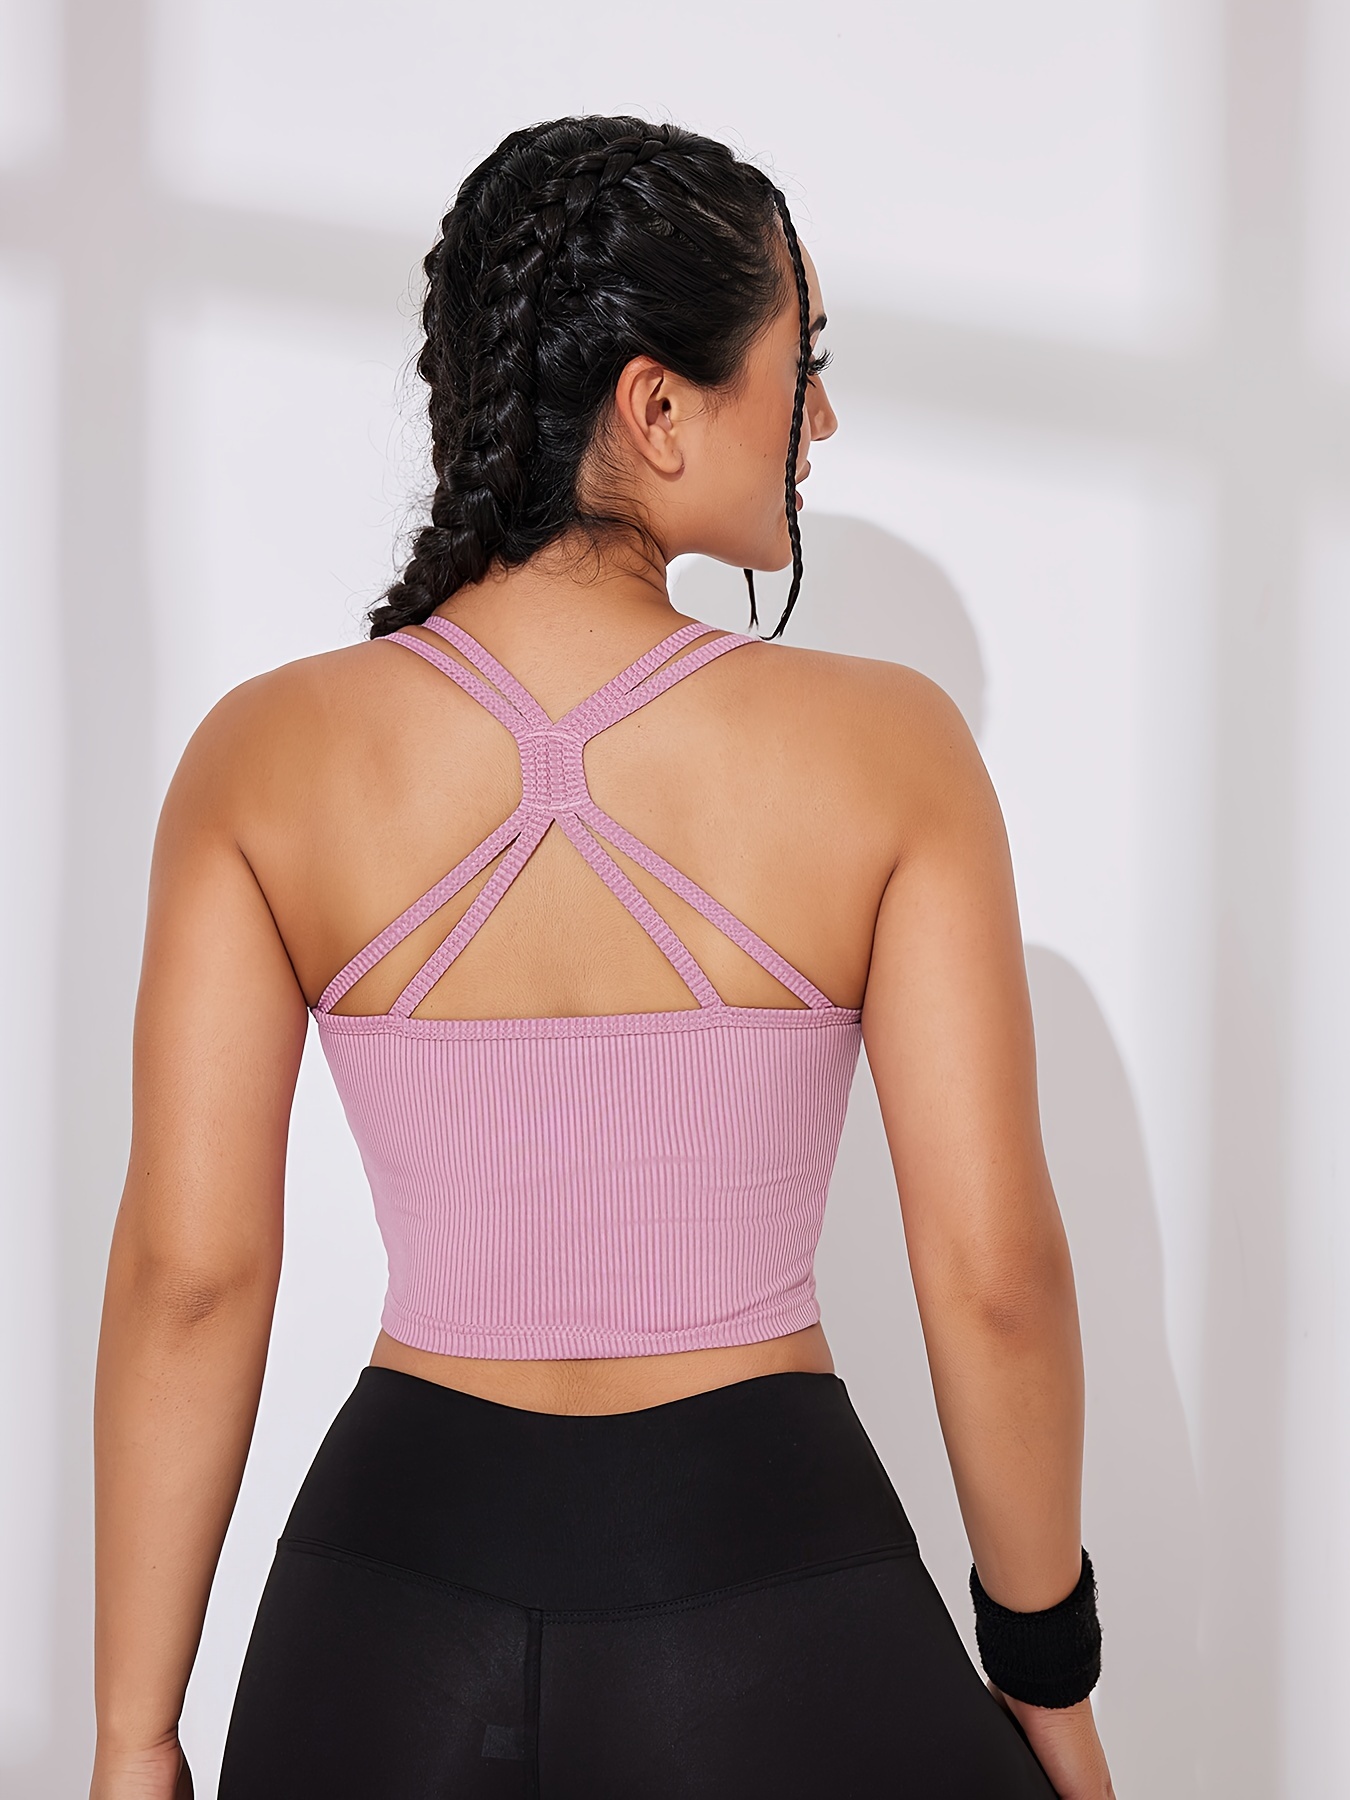 Padded Strappy Sports Bras for Women - Activewear Tops for Yoga